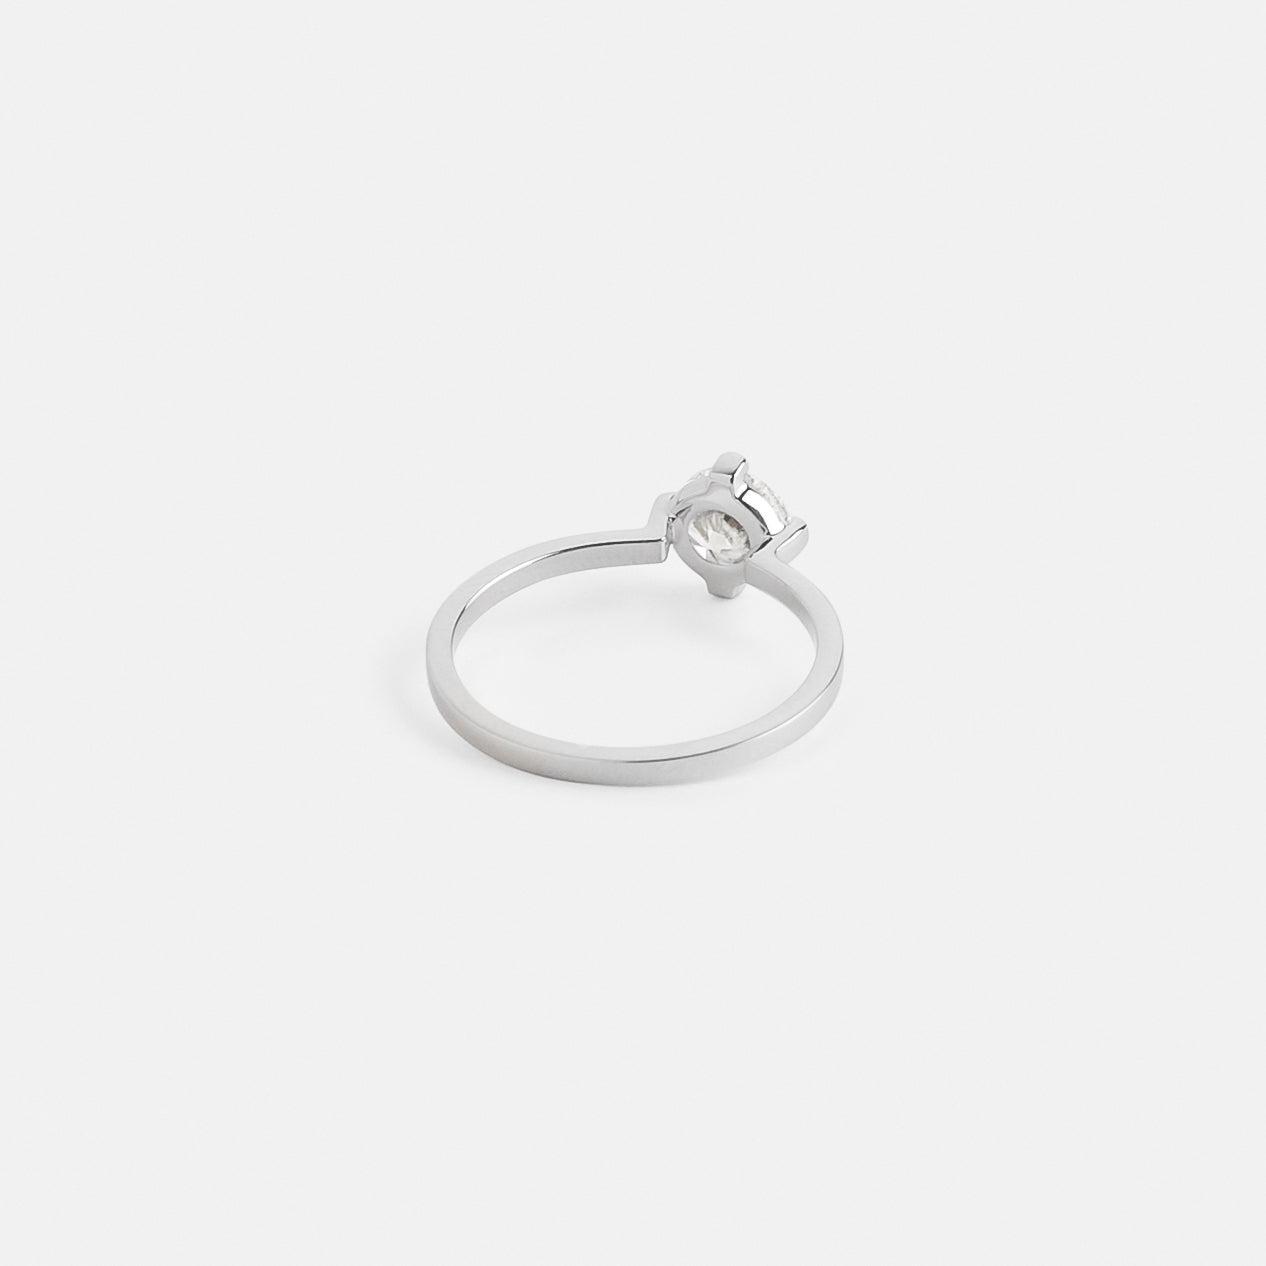 Ema Minimal Engagement Ring in Platinum Set With 1ct round brilliant cut natural diamond By SHW Fine Jewelry NYC